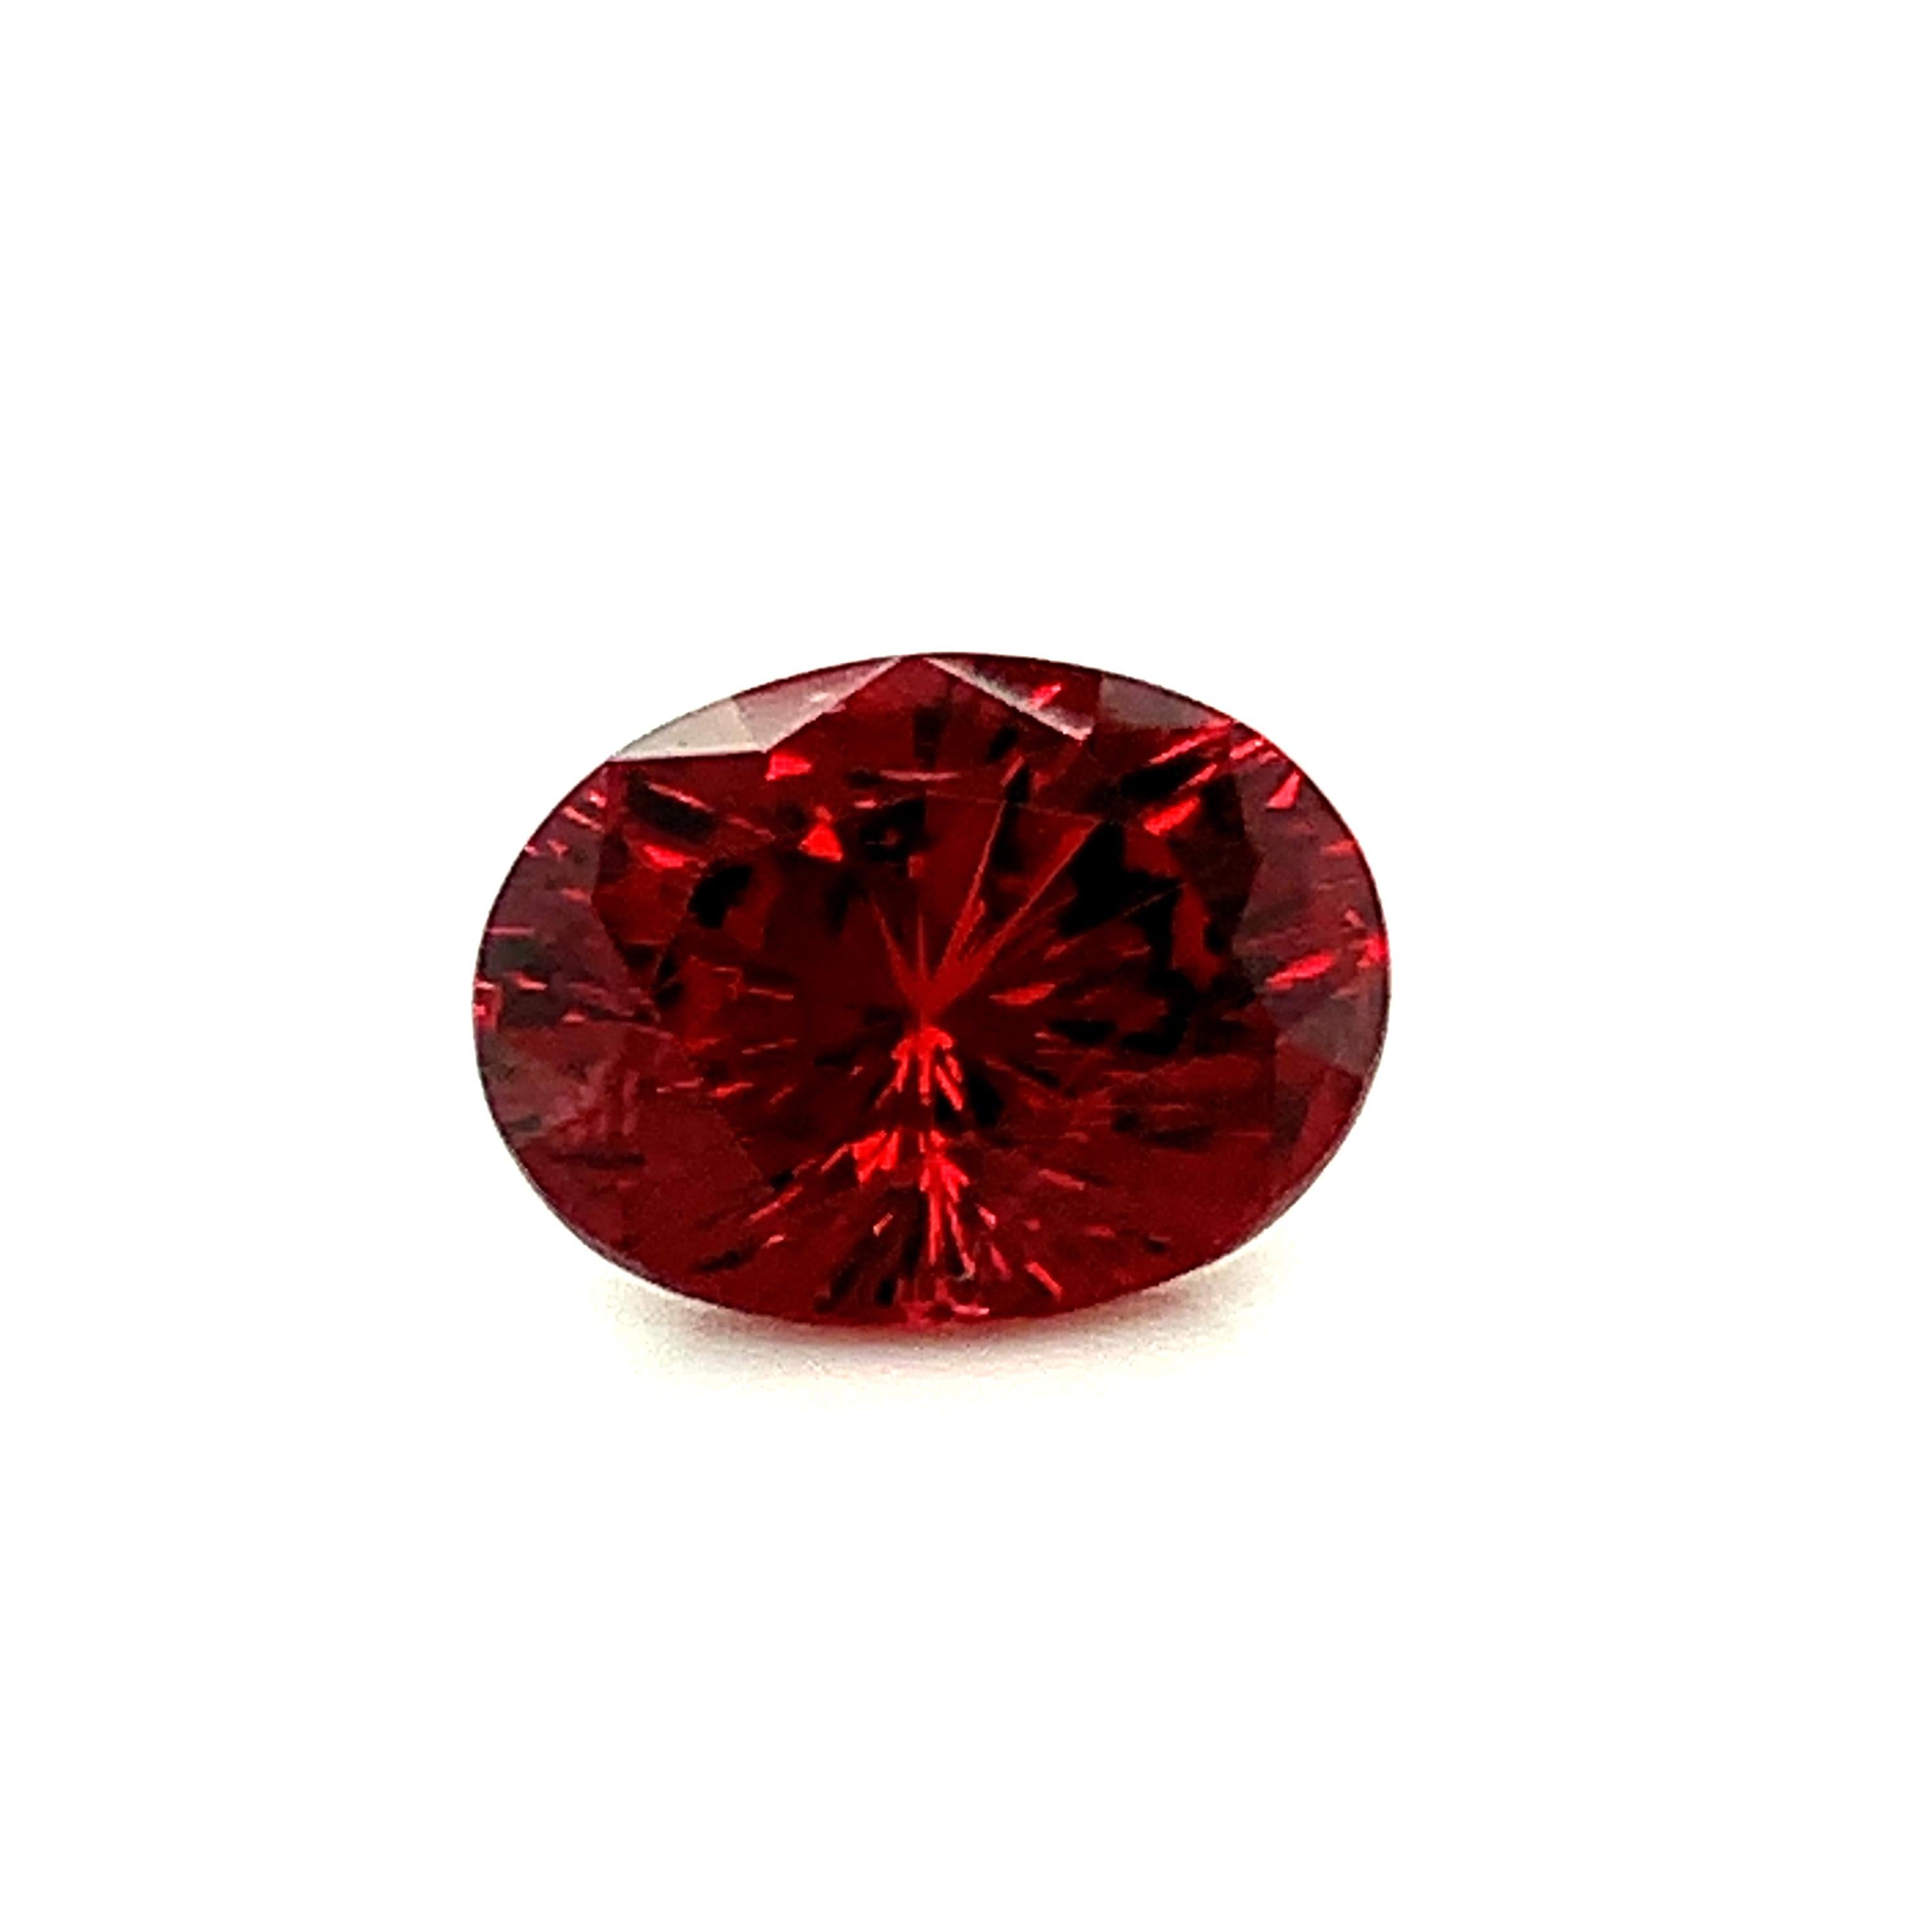 Unheated 4.84 Carat Red Spinel Oval, Unset Loose Gemstone, GIA Certified 1